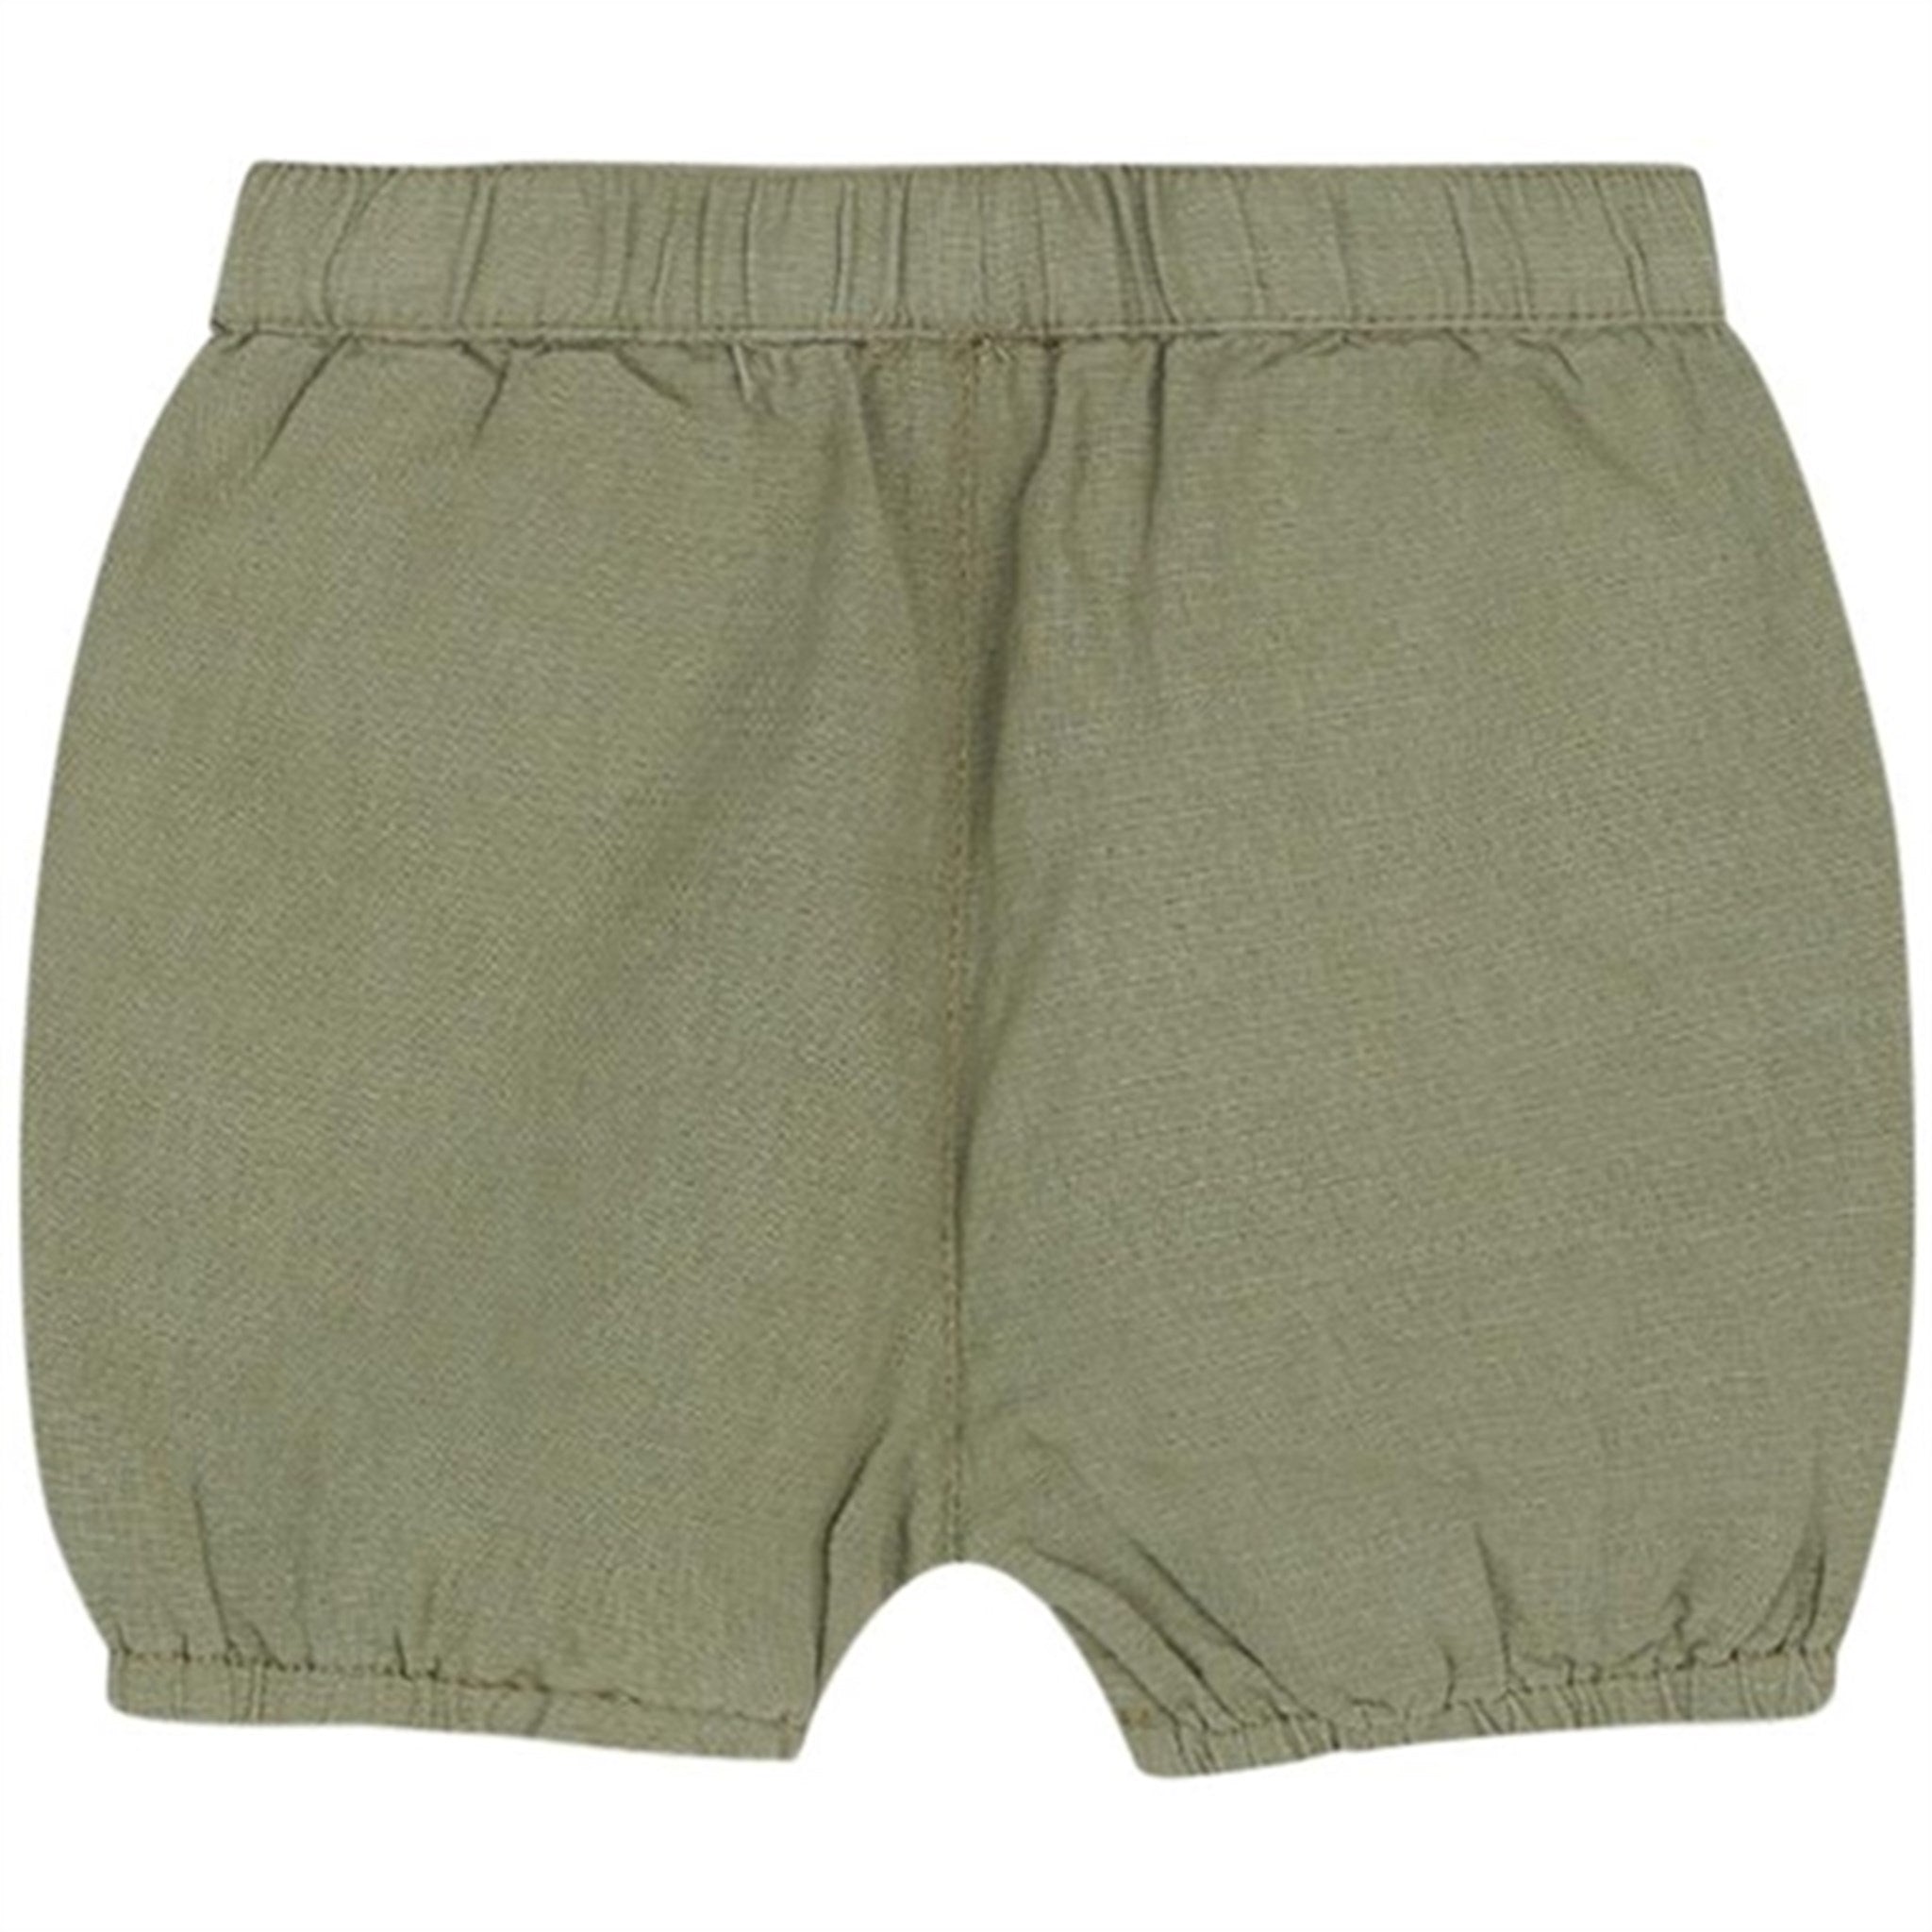 Hust & Claire Baby Herluf Shorts Seagrass 2